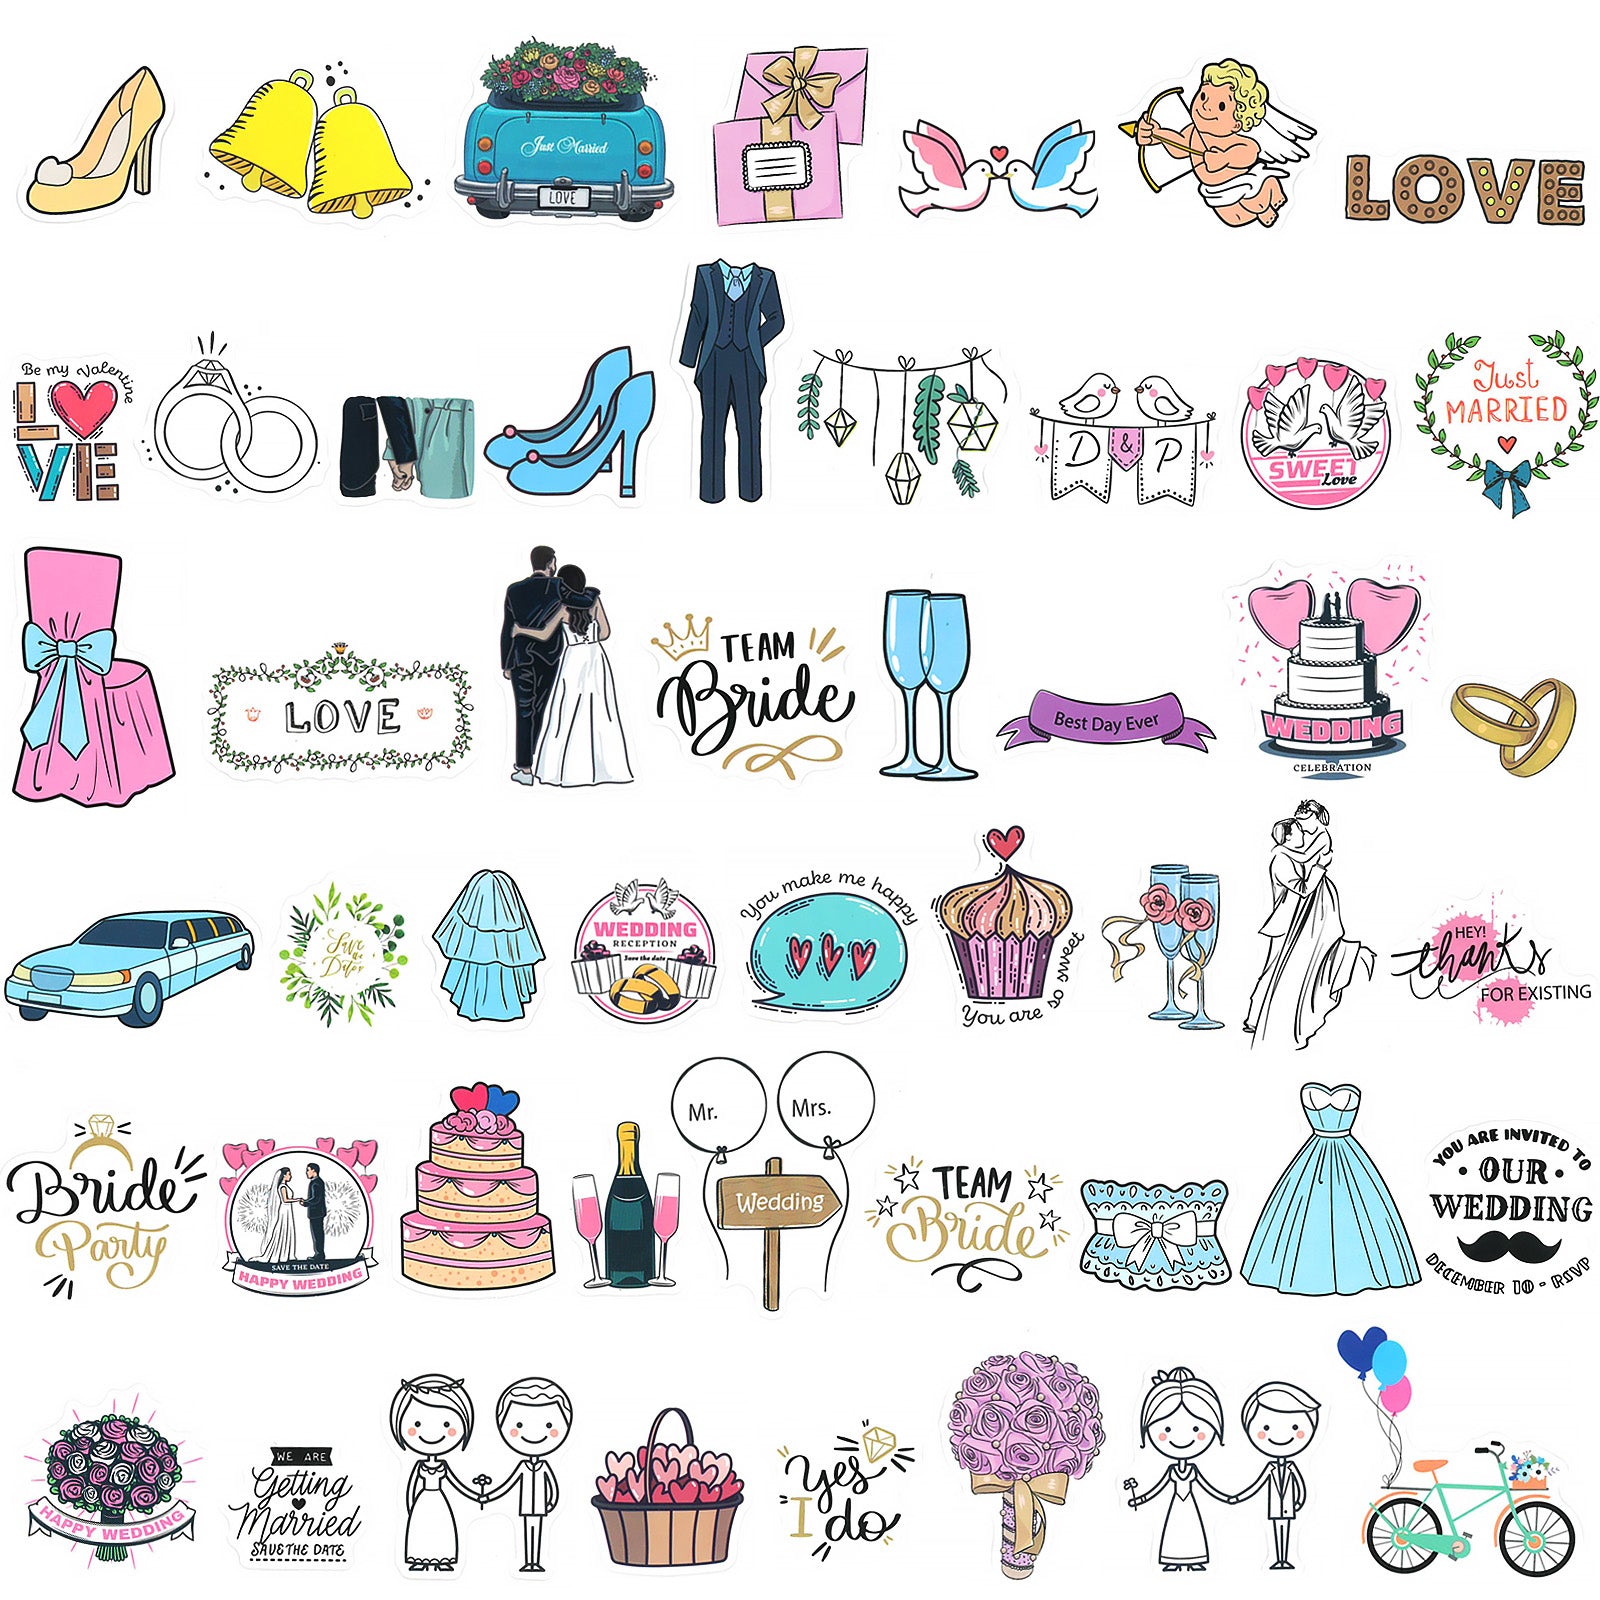 Wrapables Waterproof Vinyl Stickers for Water Bottles, Laptop, Phones, Skateboards, Decals for Teens 100pcs Wedding